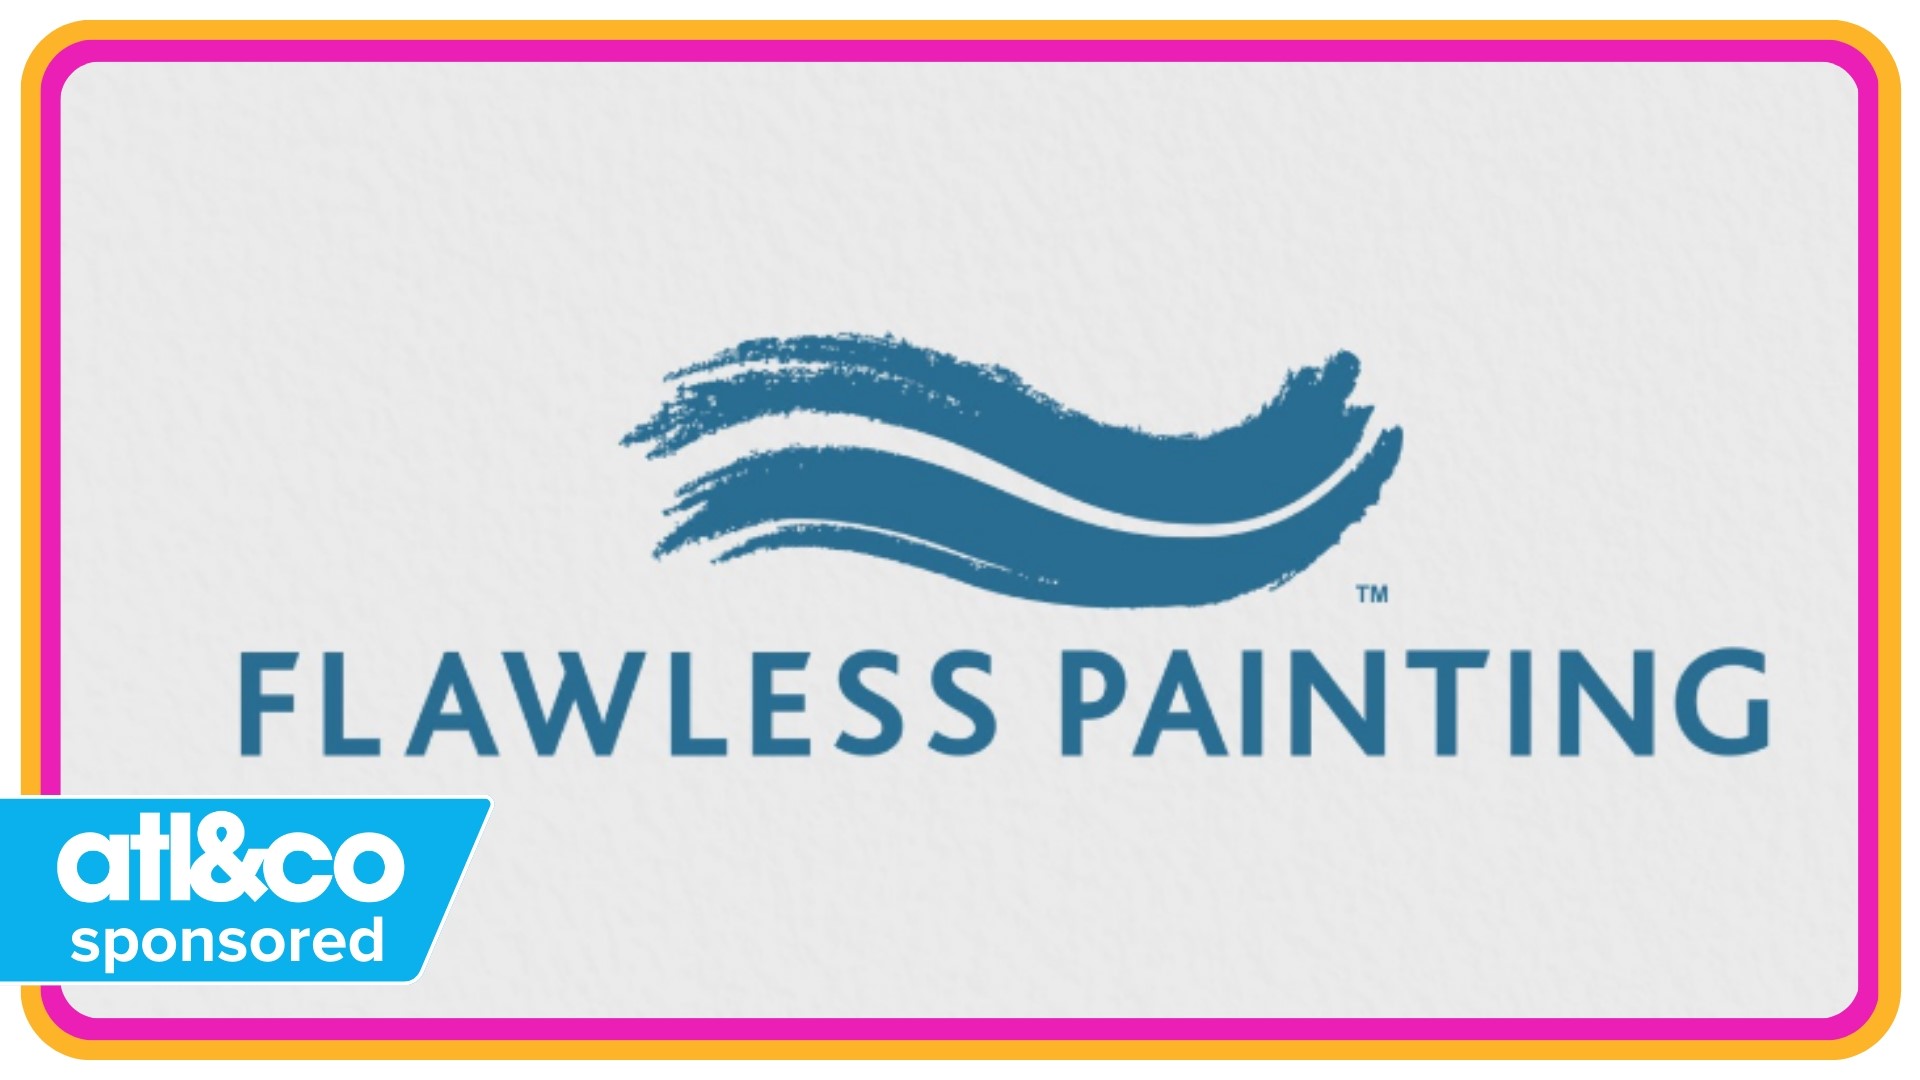 Spruce up the look of your home this spring with the help of Flawless Painting.